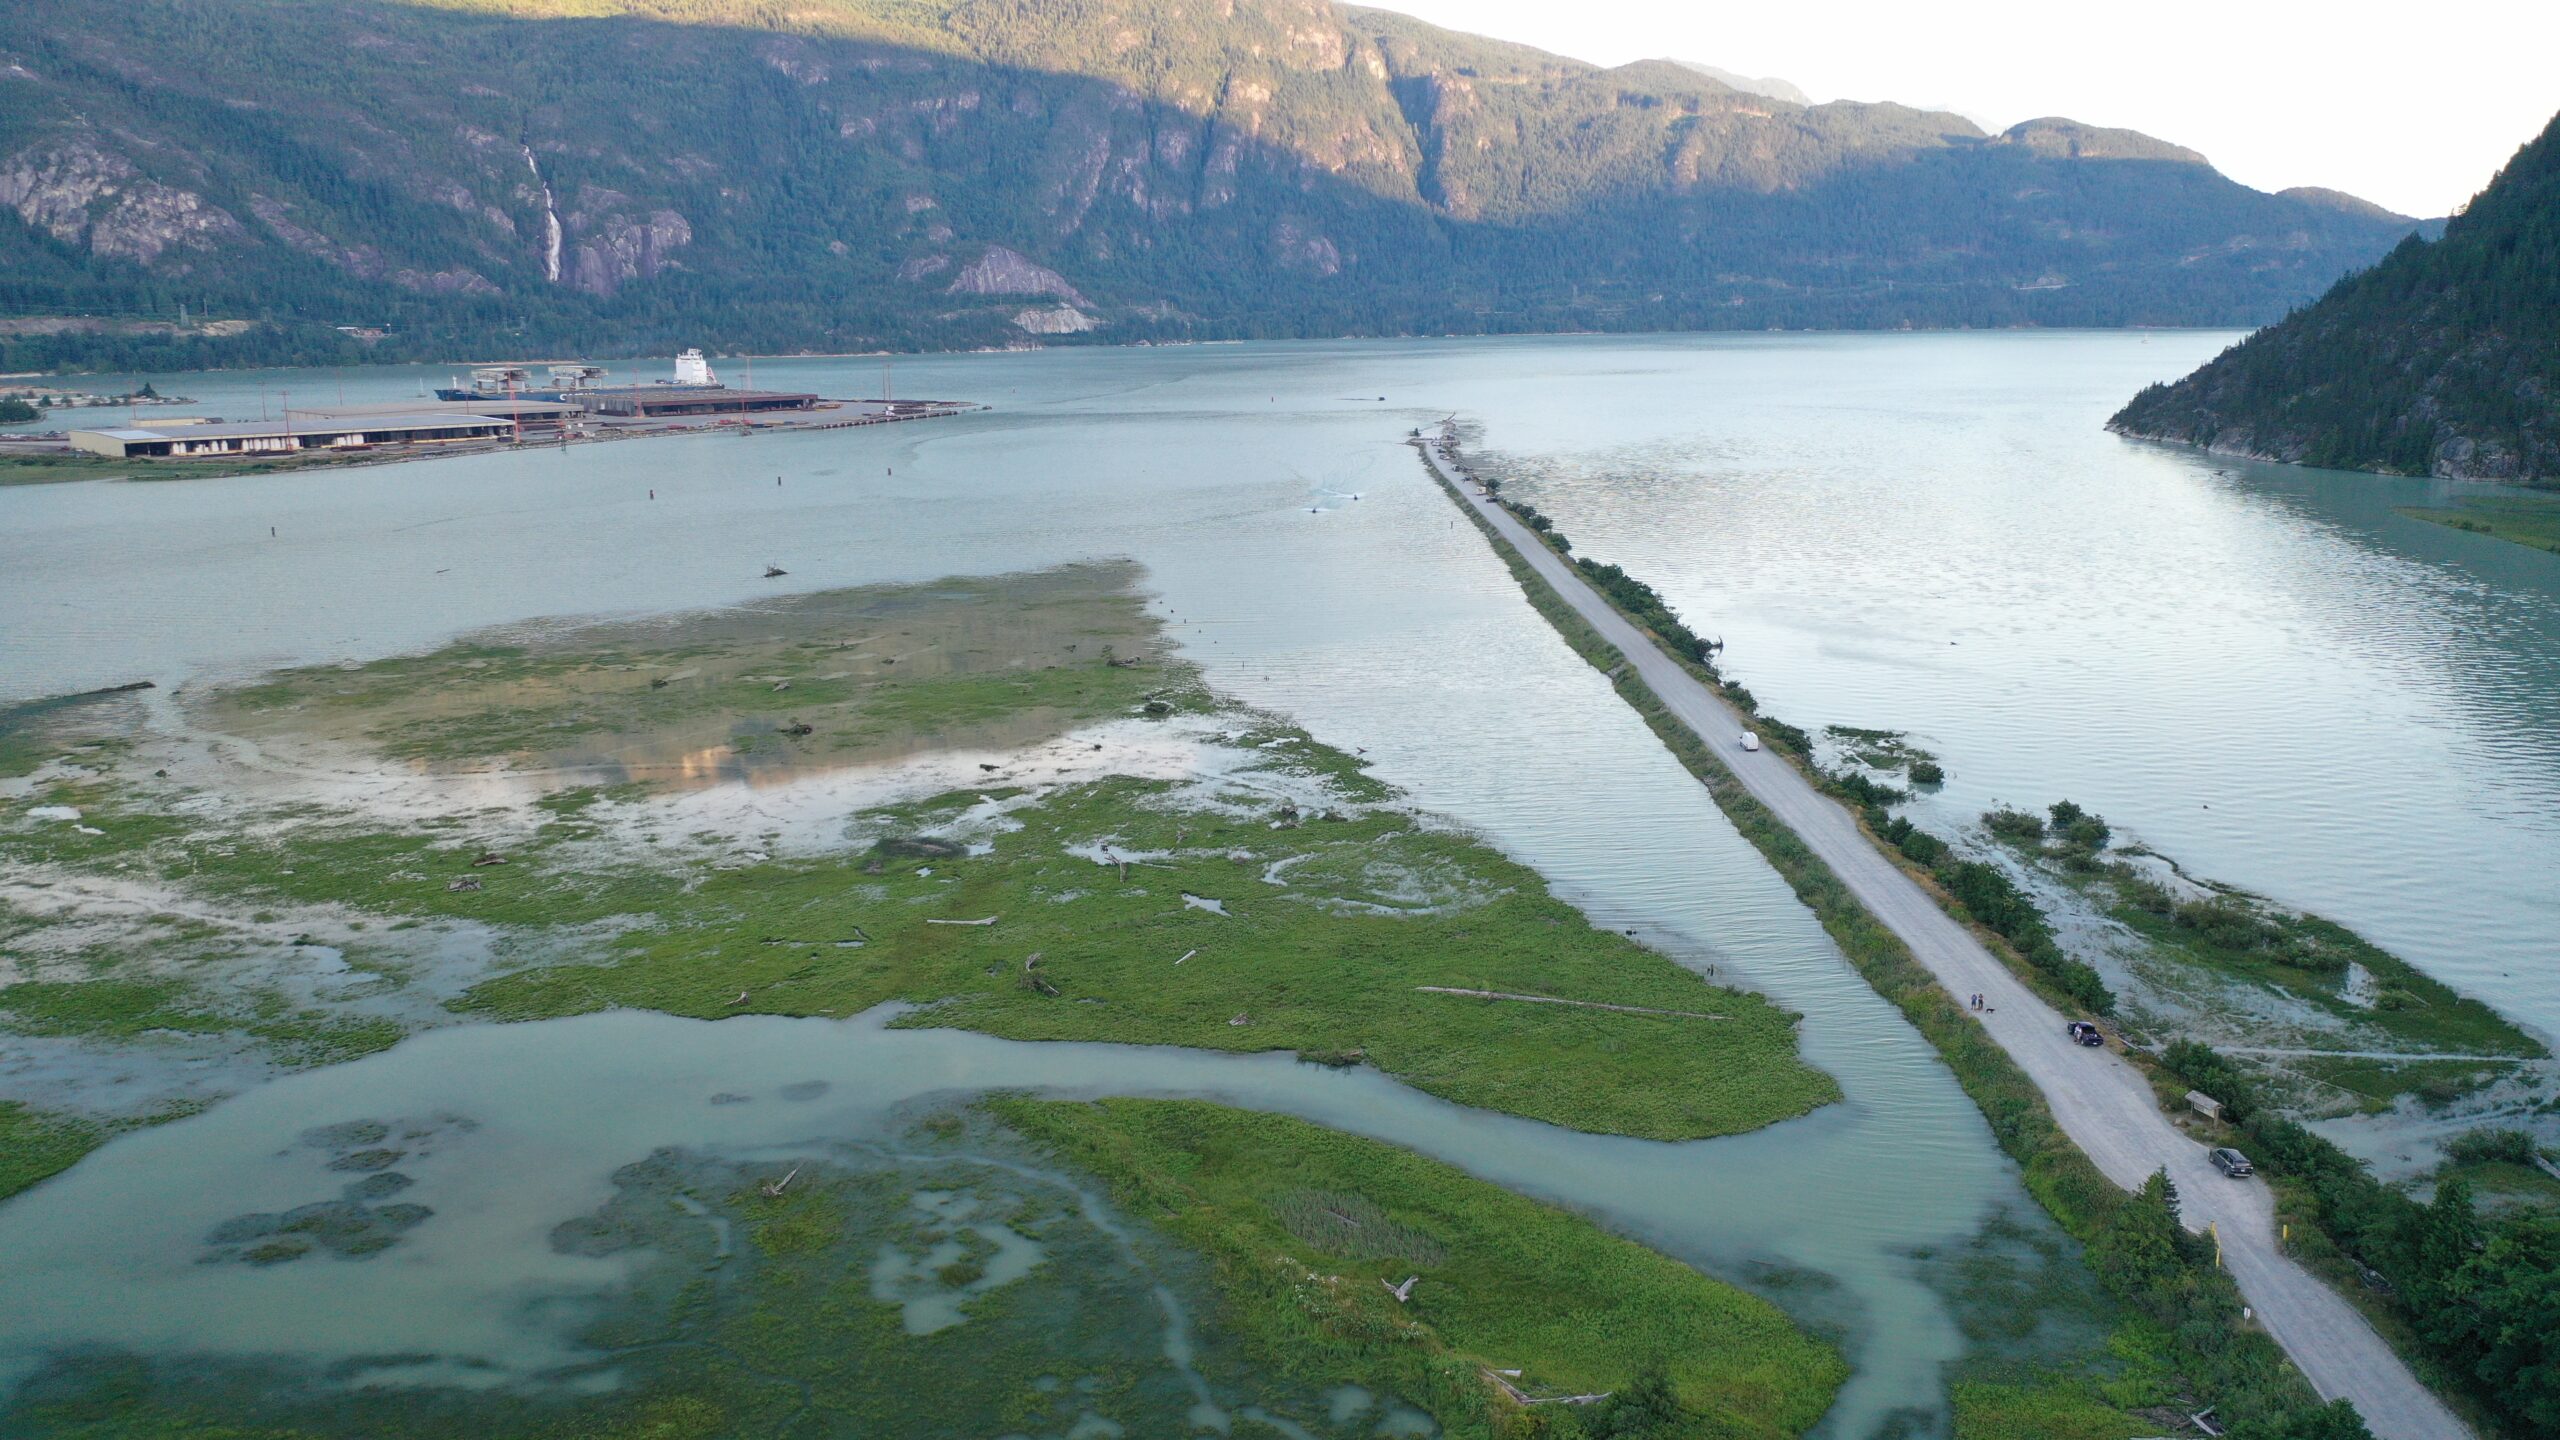 Squamish River spit: An aerial few of a 5-kilometre spit stretching into the ocean water of Howe Sound. On the right is the Squamish River mouth. On the left is green marshy waters, which is the Squamish Estuary. Mountains are visible in the background.